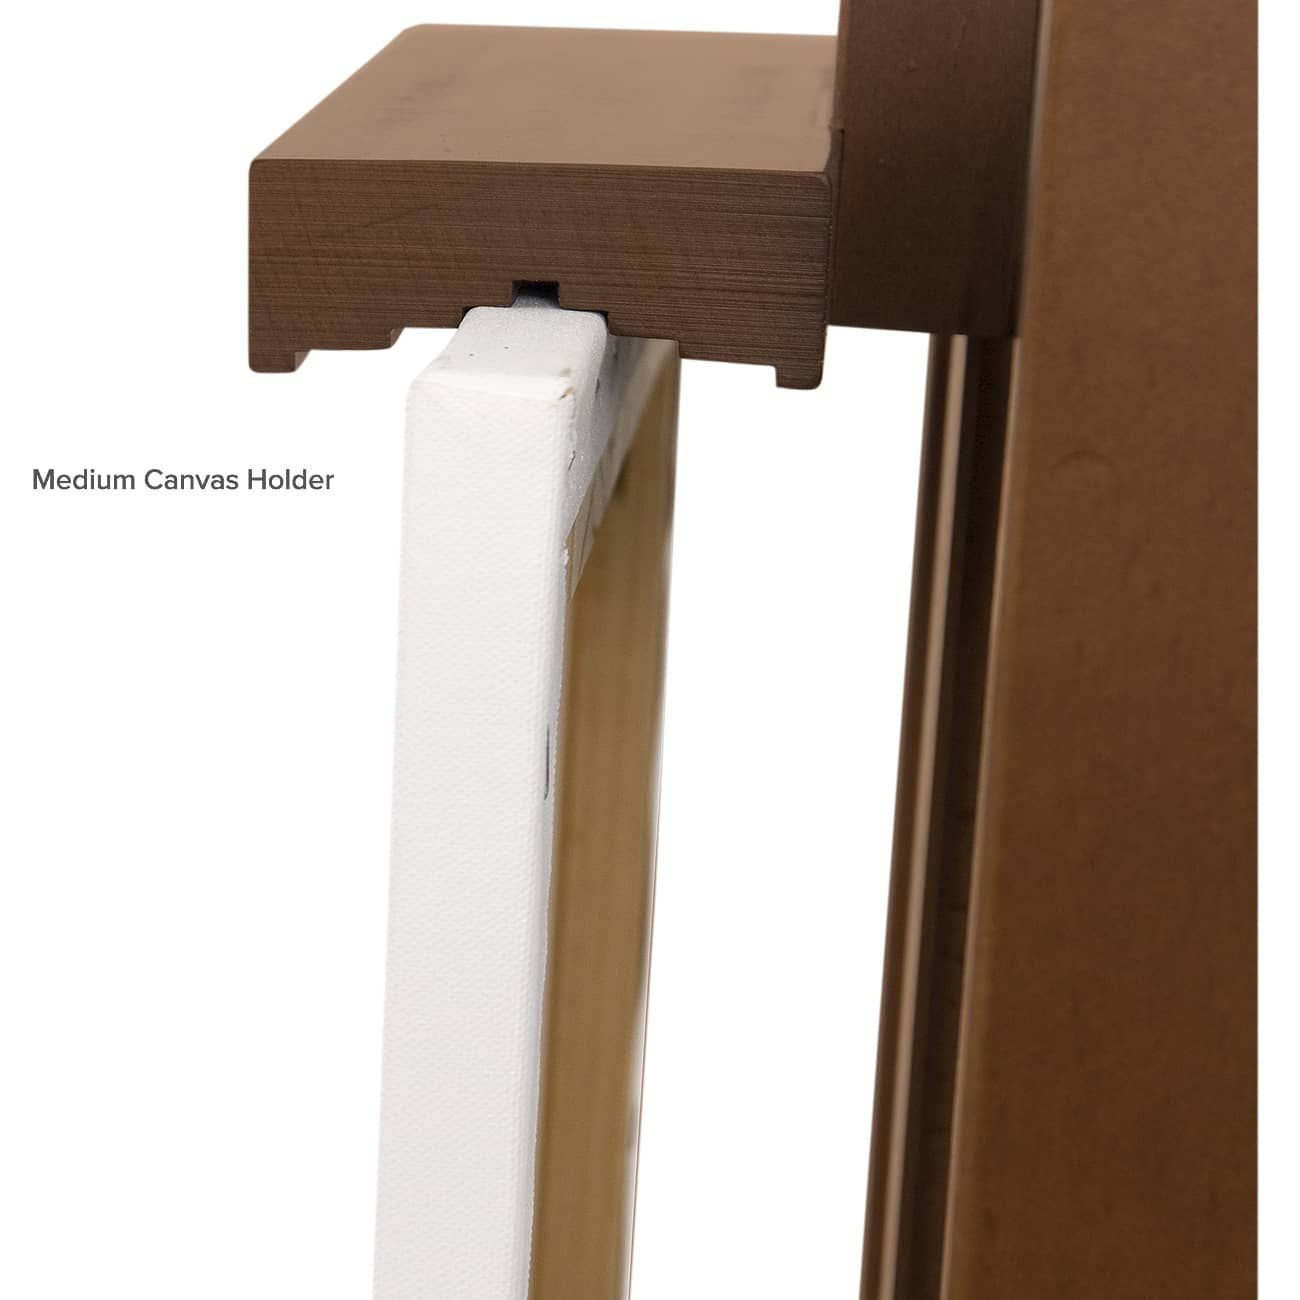 Three canvas holders allow for quick canvas set up - Medium Canvas Holder